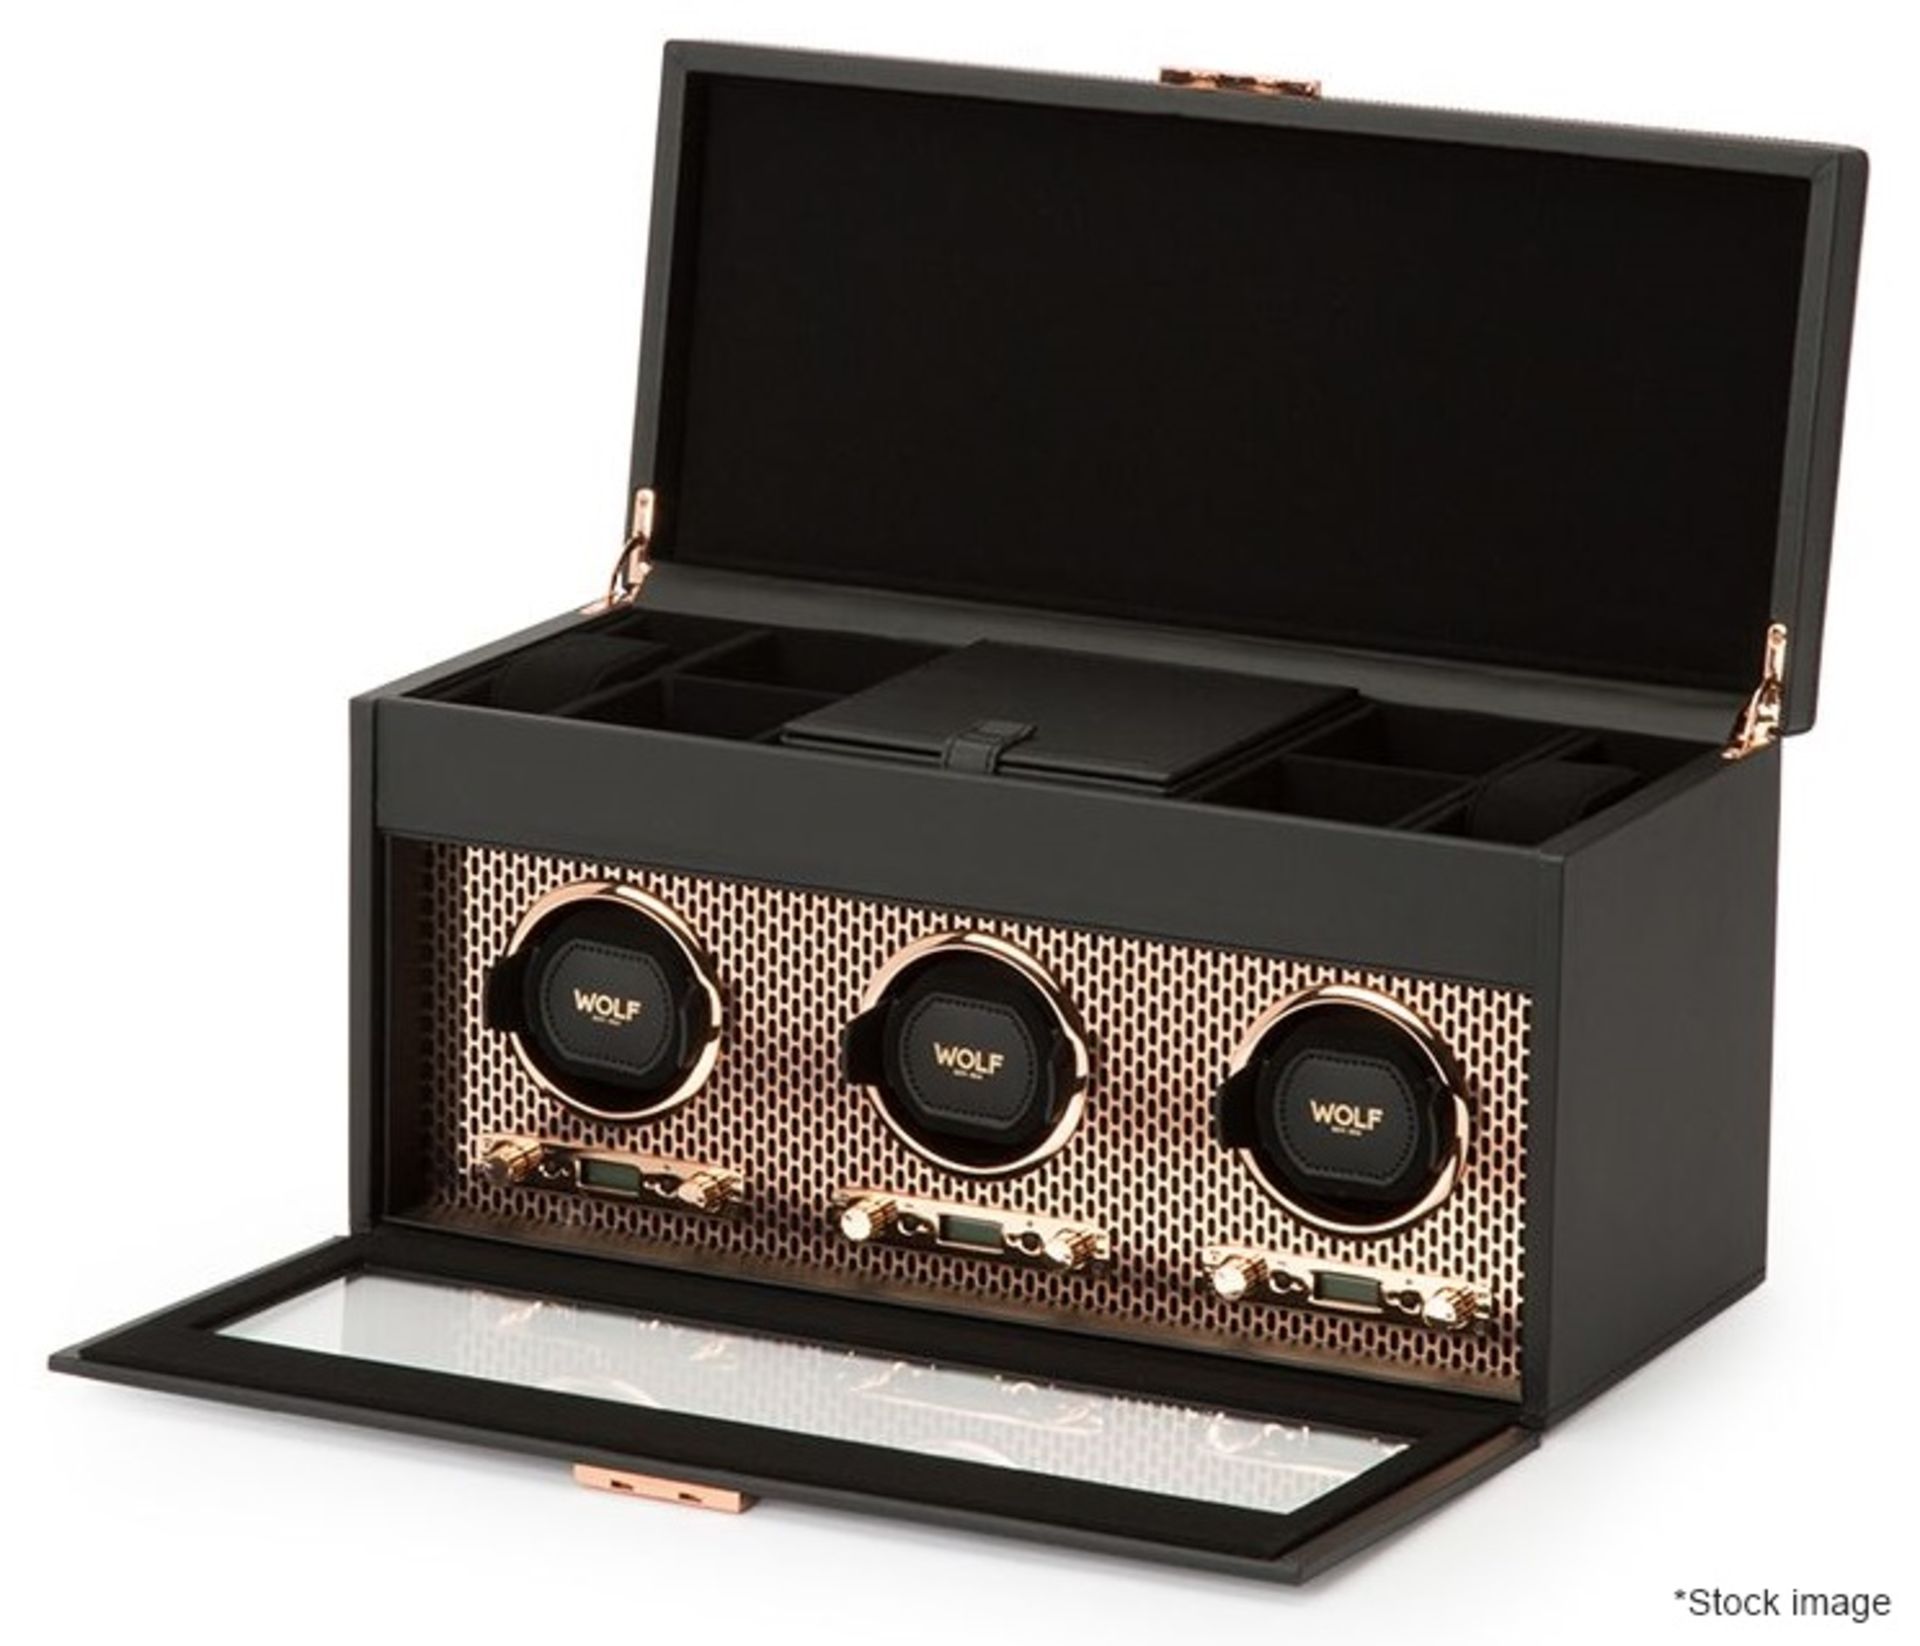 1 x WOLF 'Axis' Luxury Triple Watch Winder With Storage - Original Price £1,809 - Unused Boxed Stock - Image 10 of 32